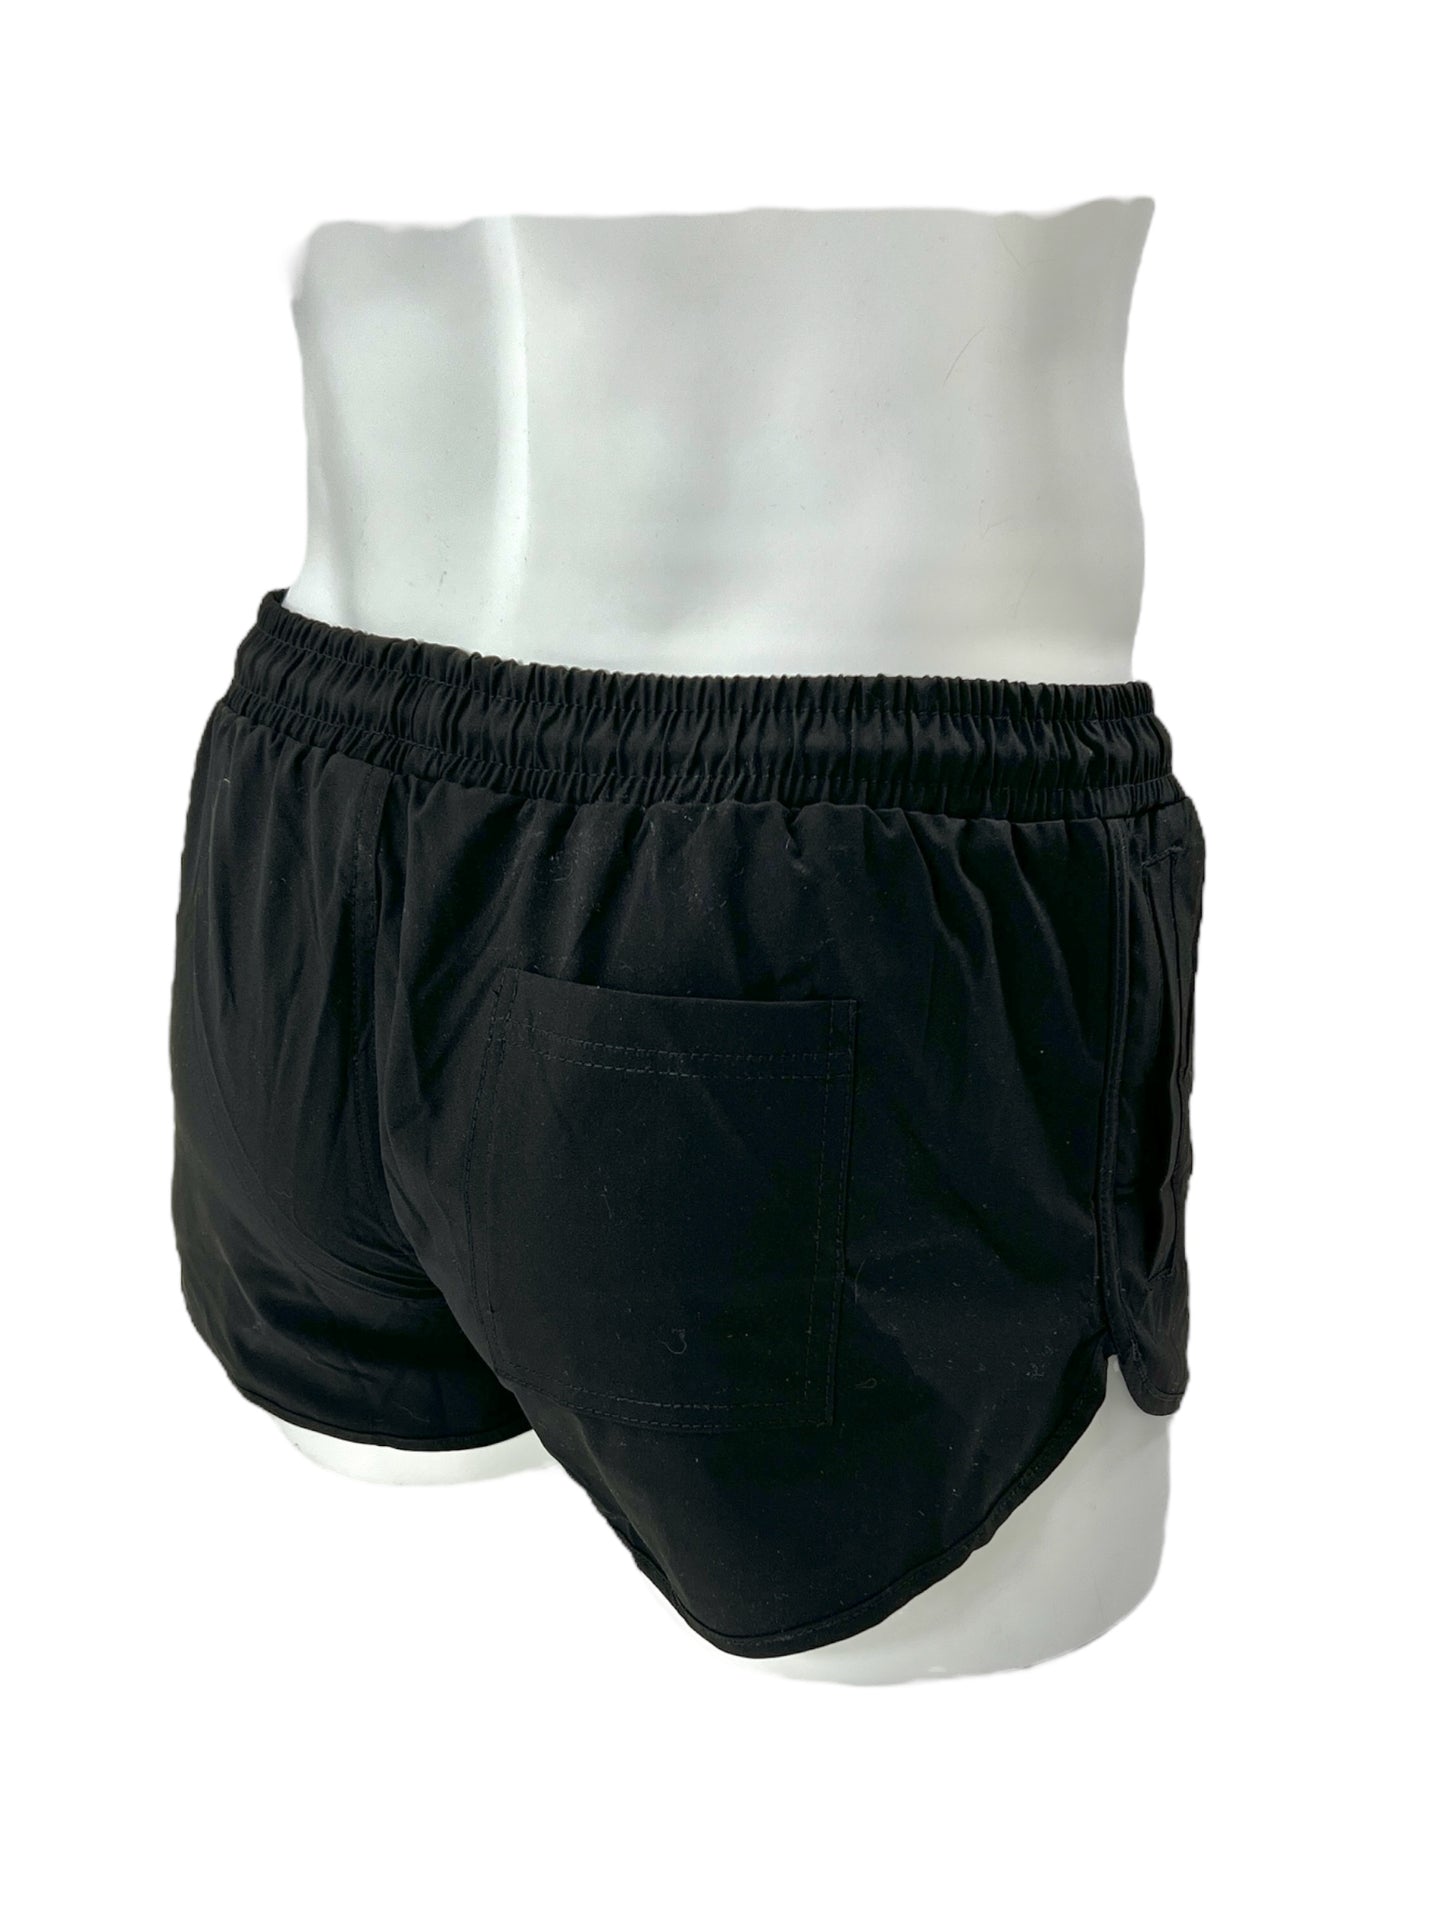 Shorts or swimming shorts with short legs in beige, black or navy